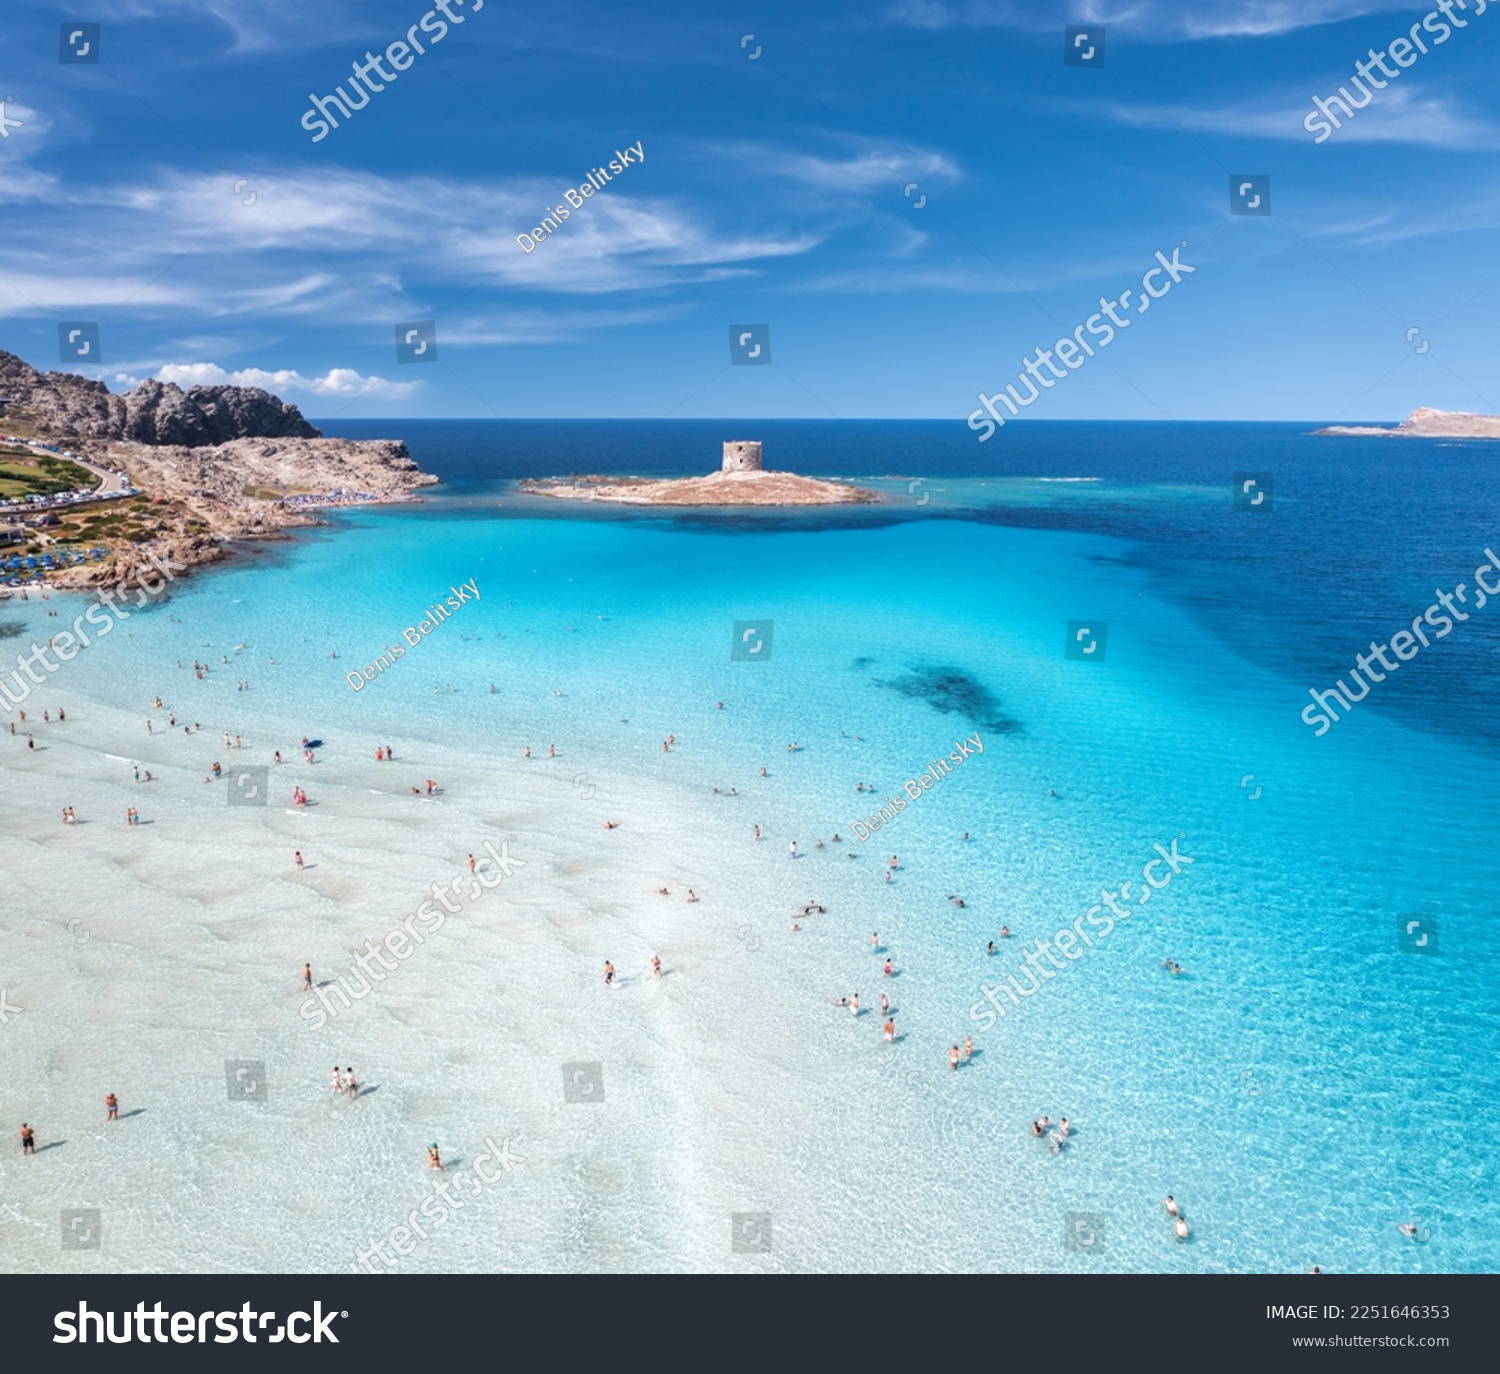 Aerial view of famous La Pelosa beach at sunny summer day. Stintino, Sardinia island, Italy. Top view of sandy beach, swimming people, clear blue sea, old tower and sky with clouds. Tropical seascape #2251646353